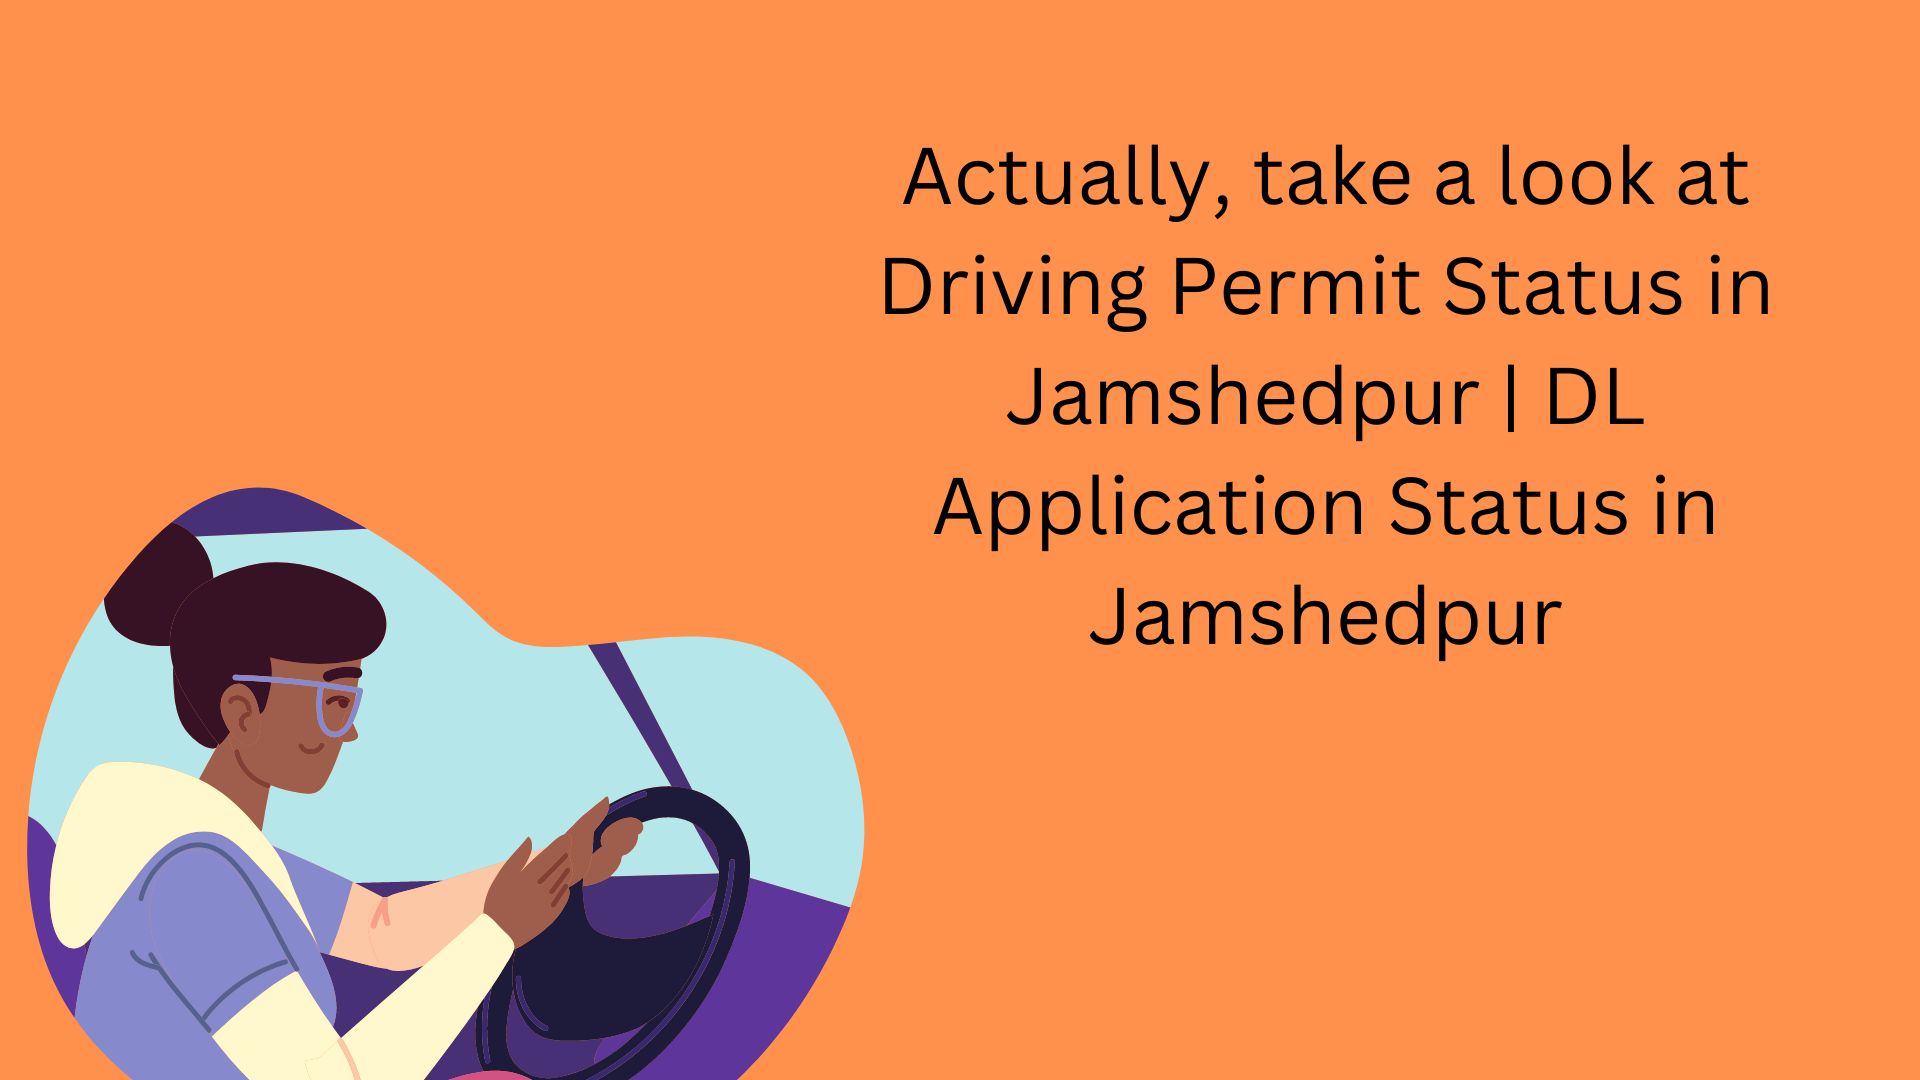 Actually, take a look at Driving Permit Status in Jamshedpur DL Application Status in Jamshedpur